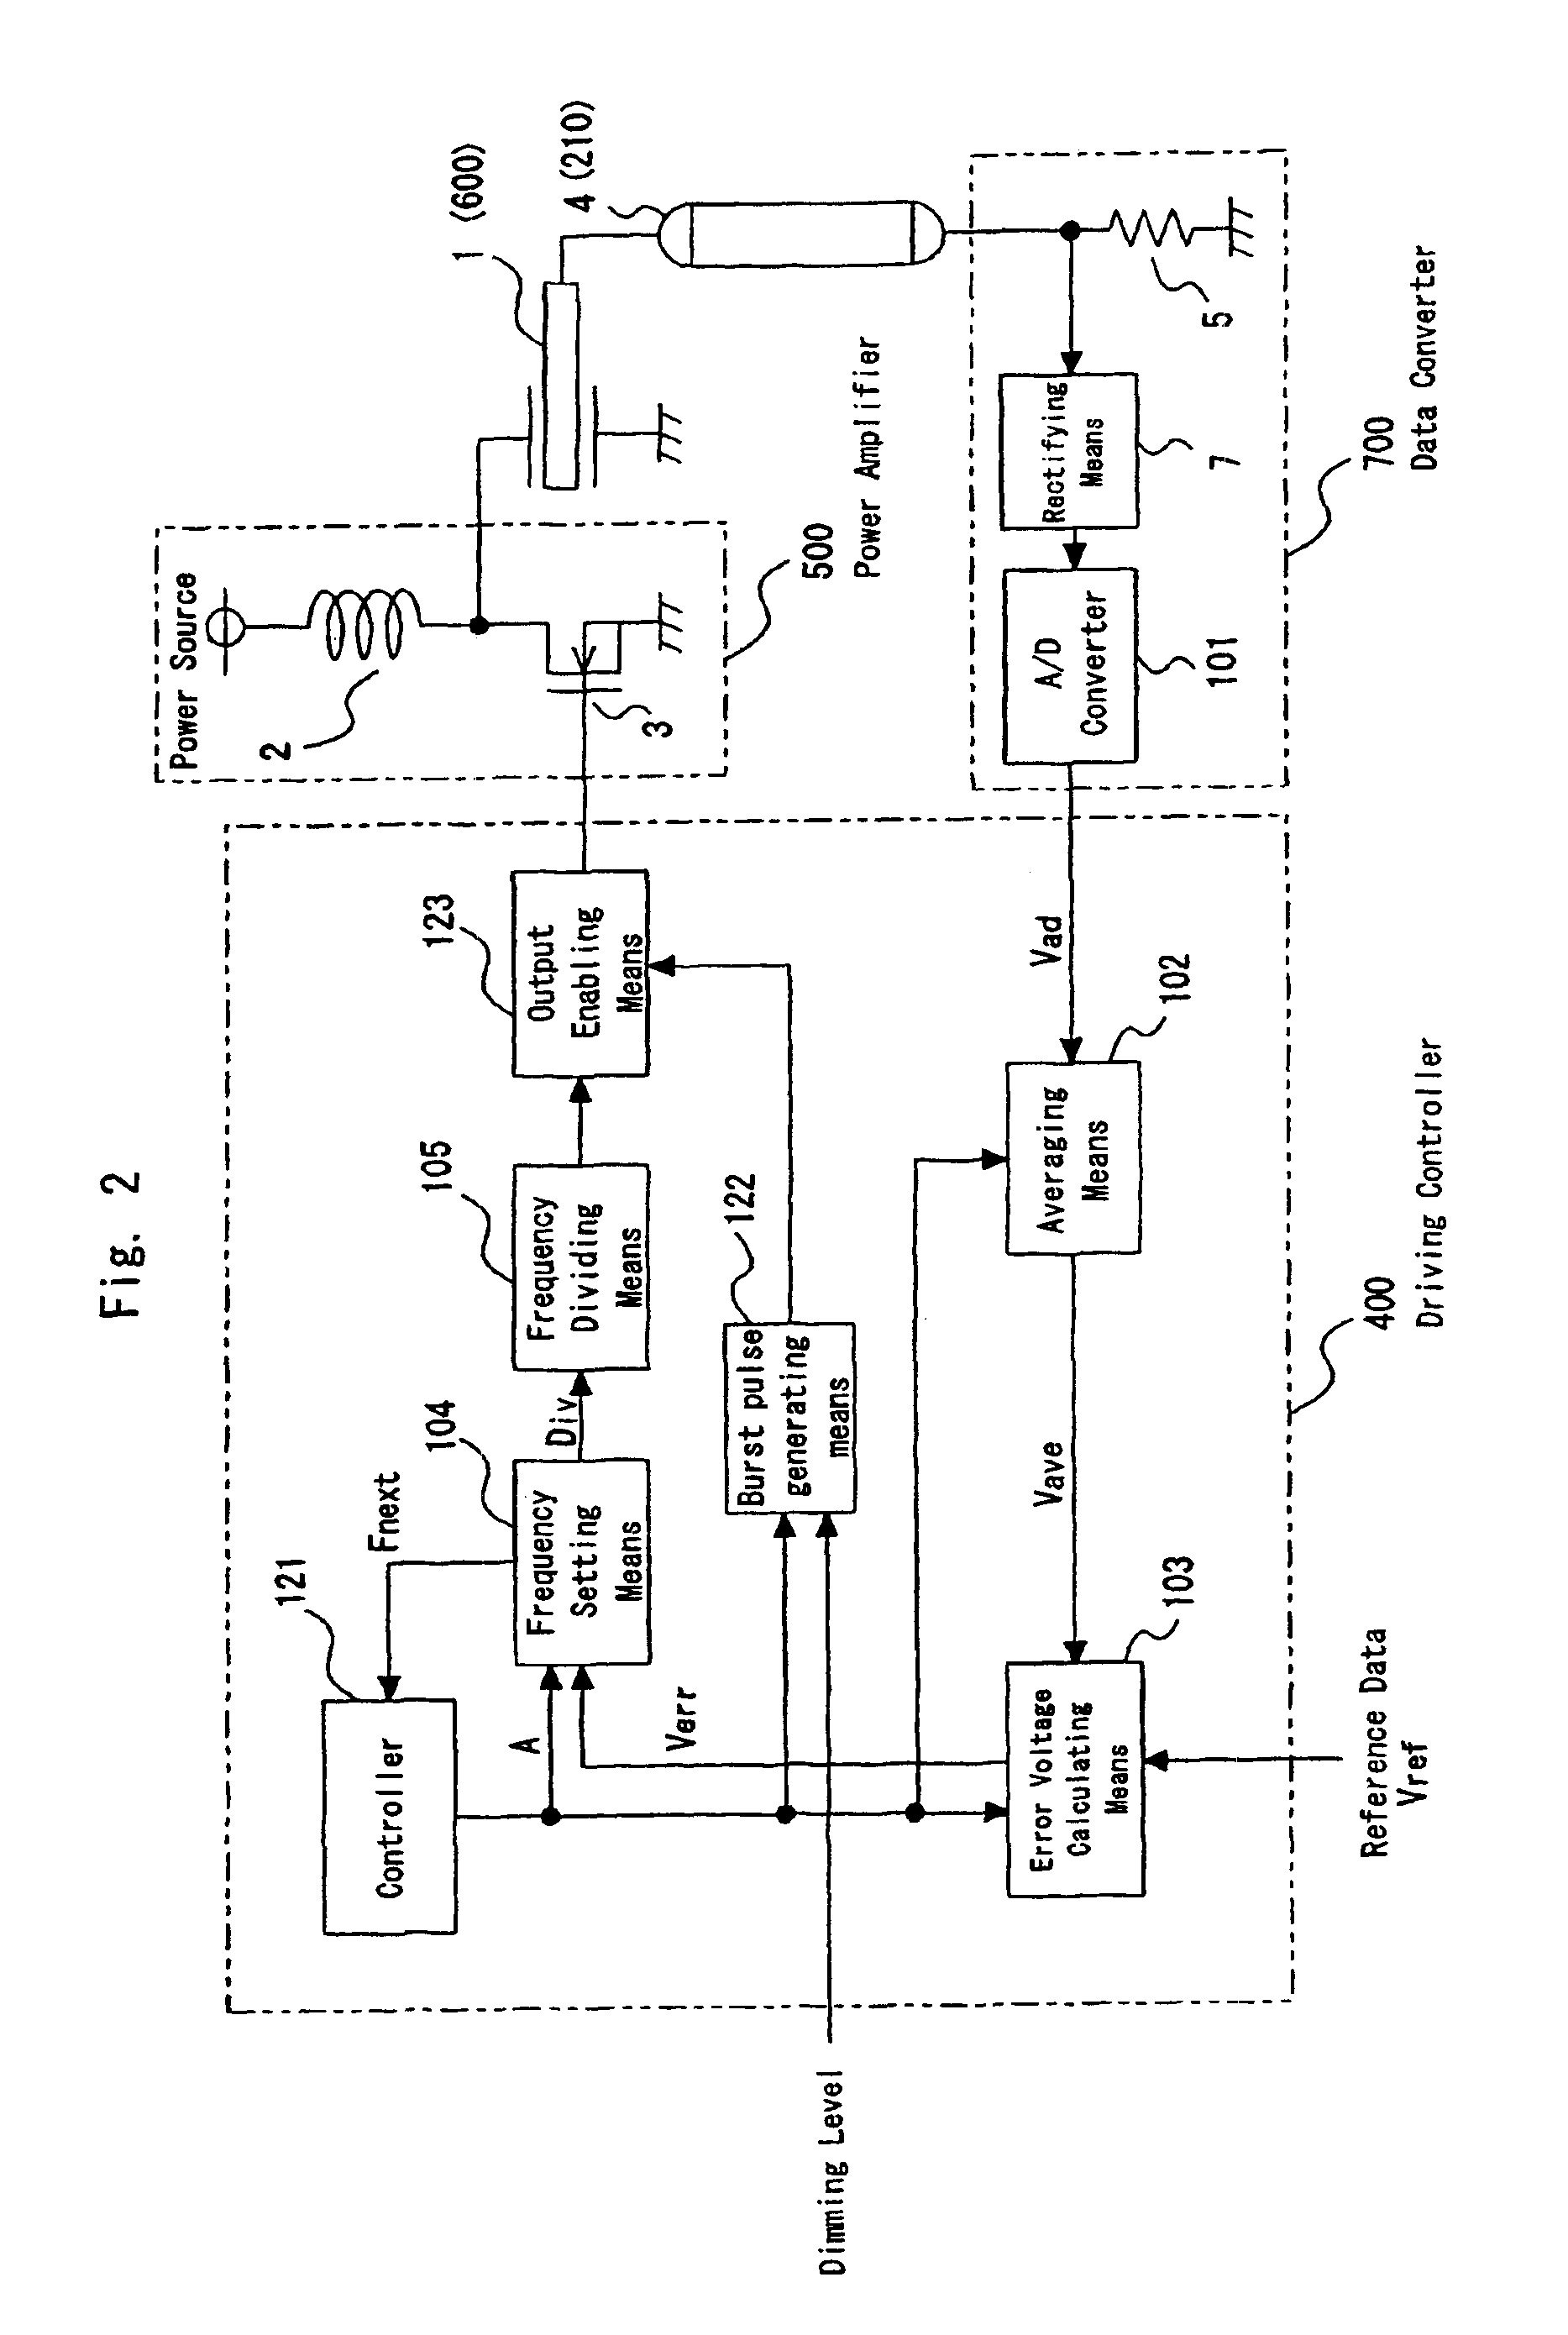 Cold-cathode driver and liquid crystal display